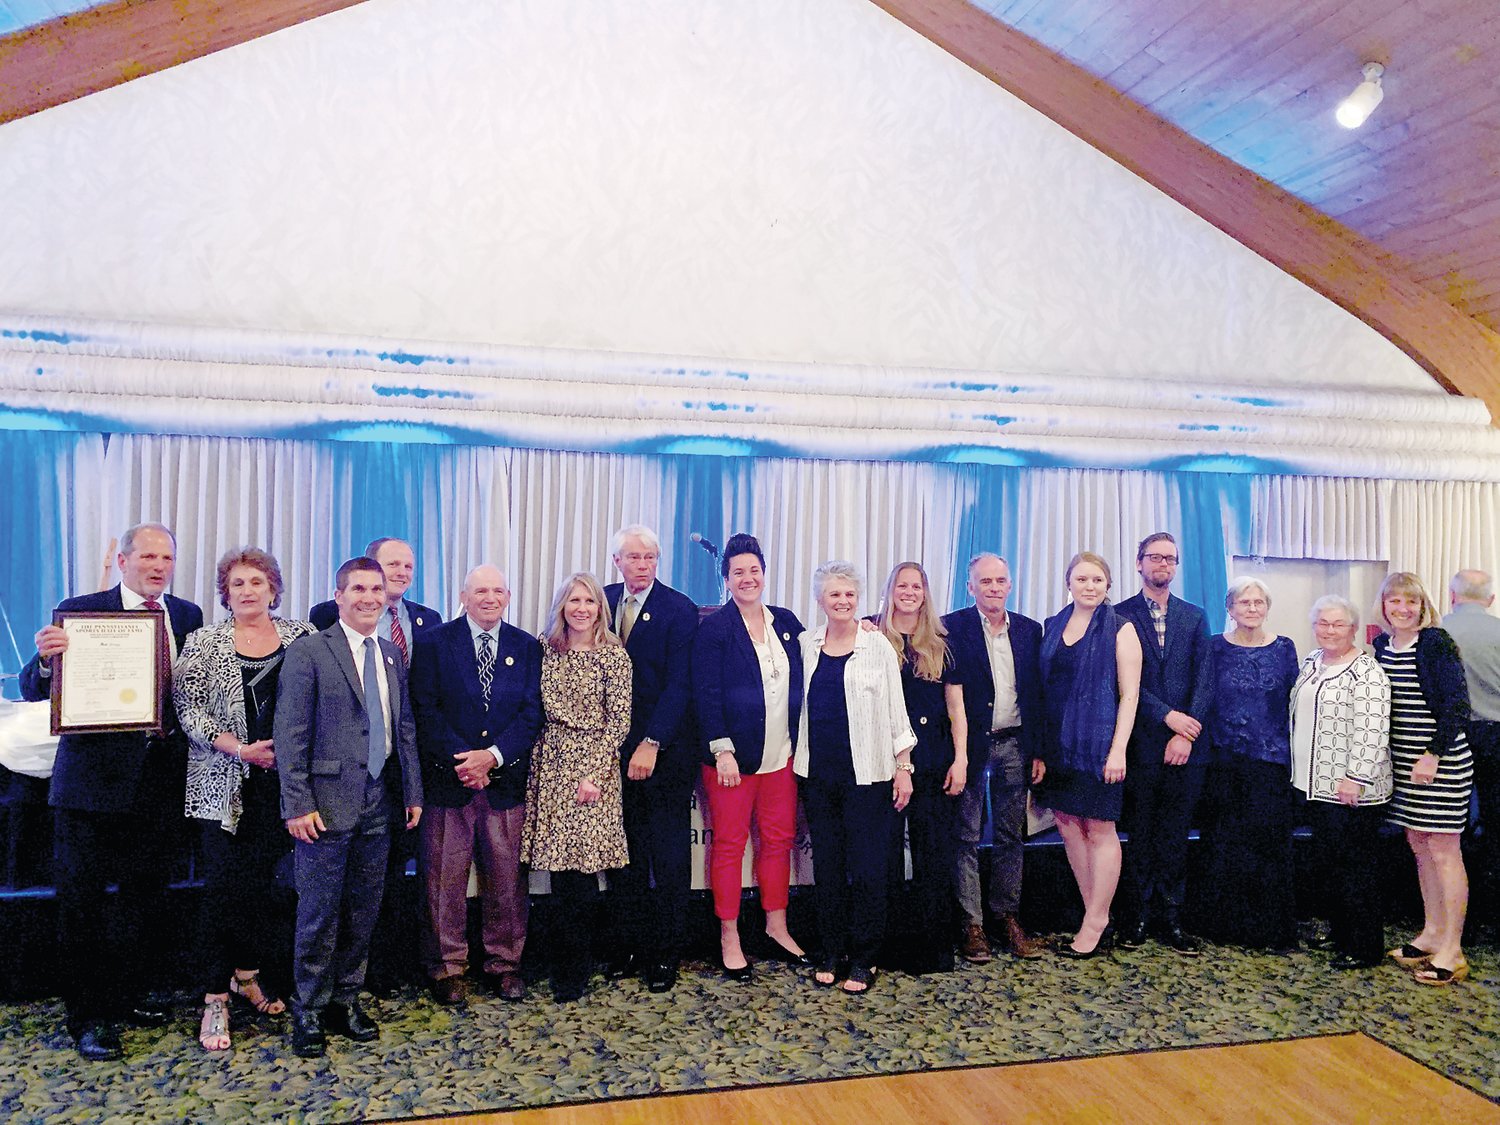 Honorees, inductees and those representing them gather at the Bucks County Chapter of the Pennsylvania Sports Hall of Fame induction ceremony April 11 at Brookside Manor in Feasterville. Photograph courtesy of Marybeth Freeman.